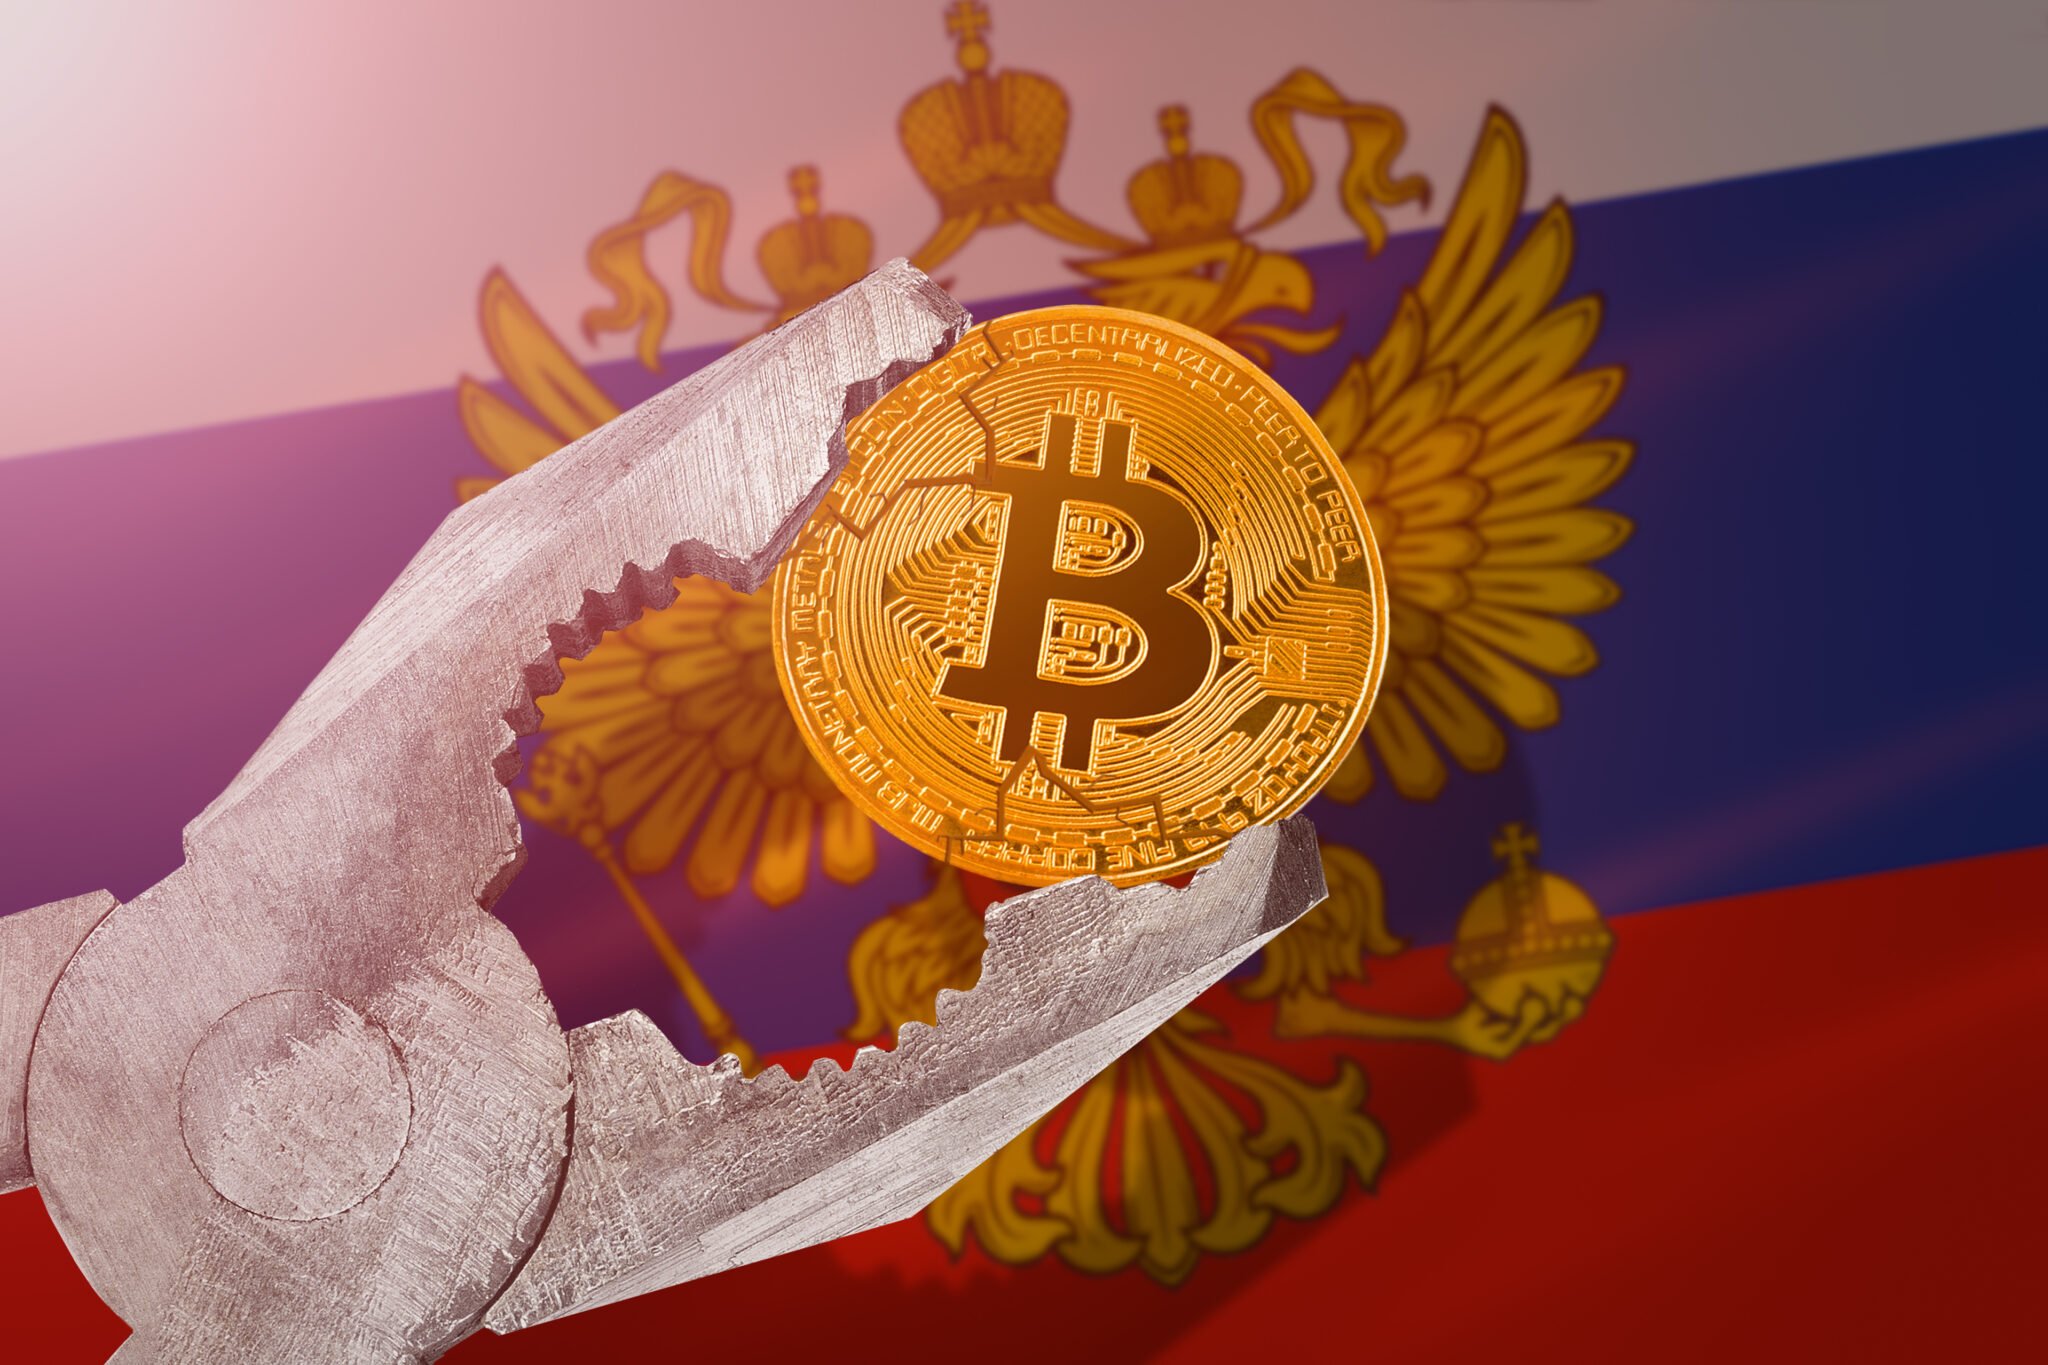 Bitcoin regulation in Russia; bitcoin btc coin being squeezed in vice on Russian flag background; limitation, prohibition, illegally, banned